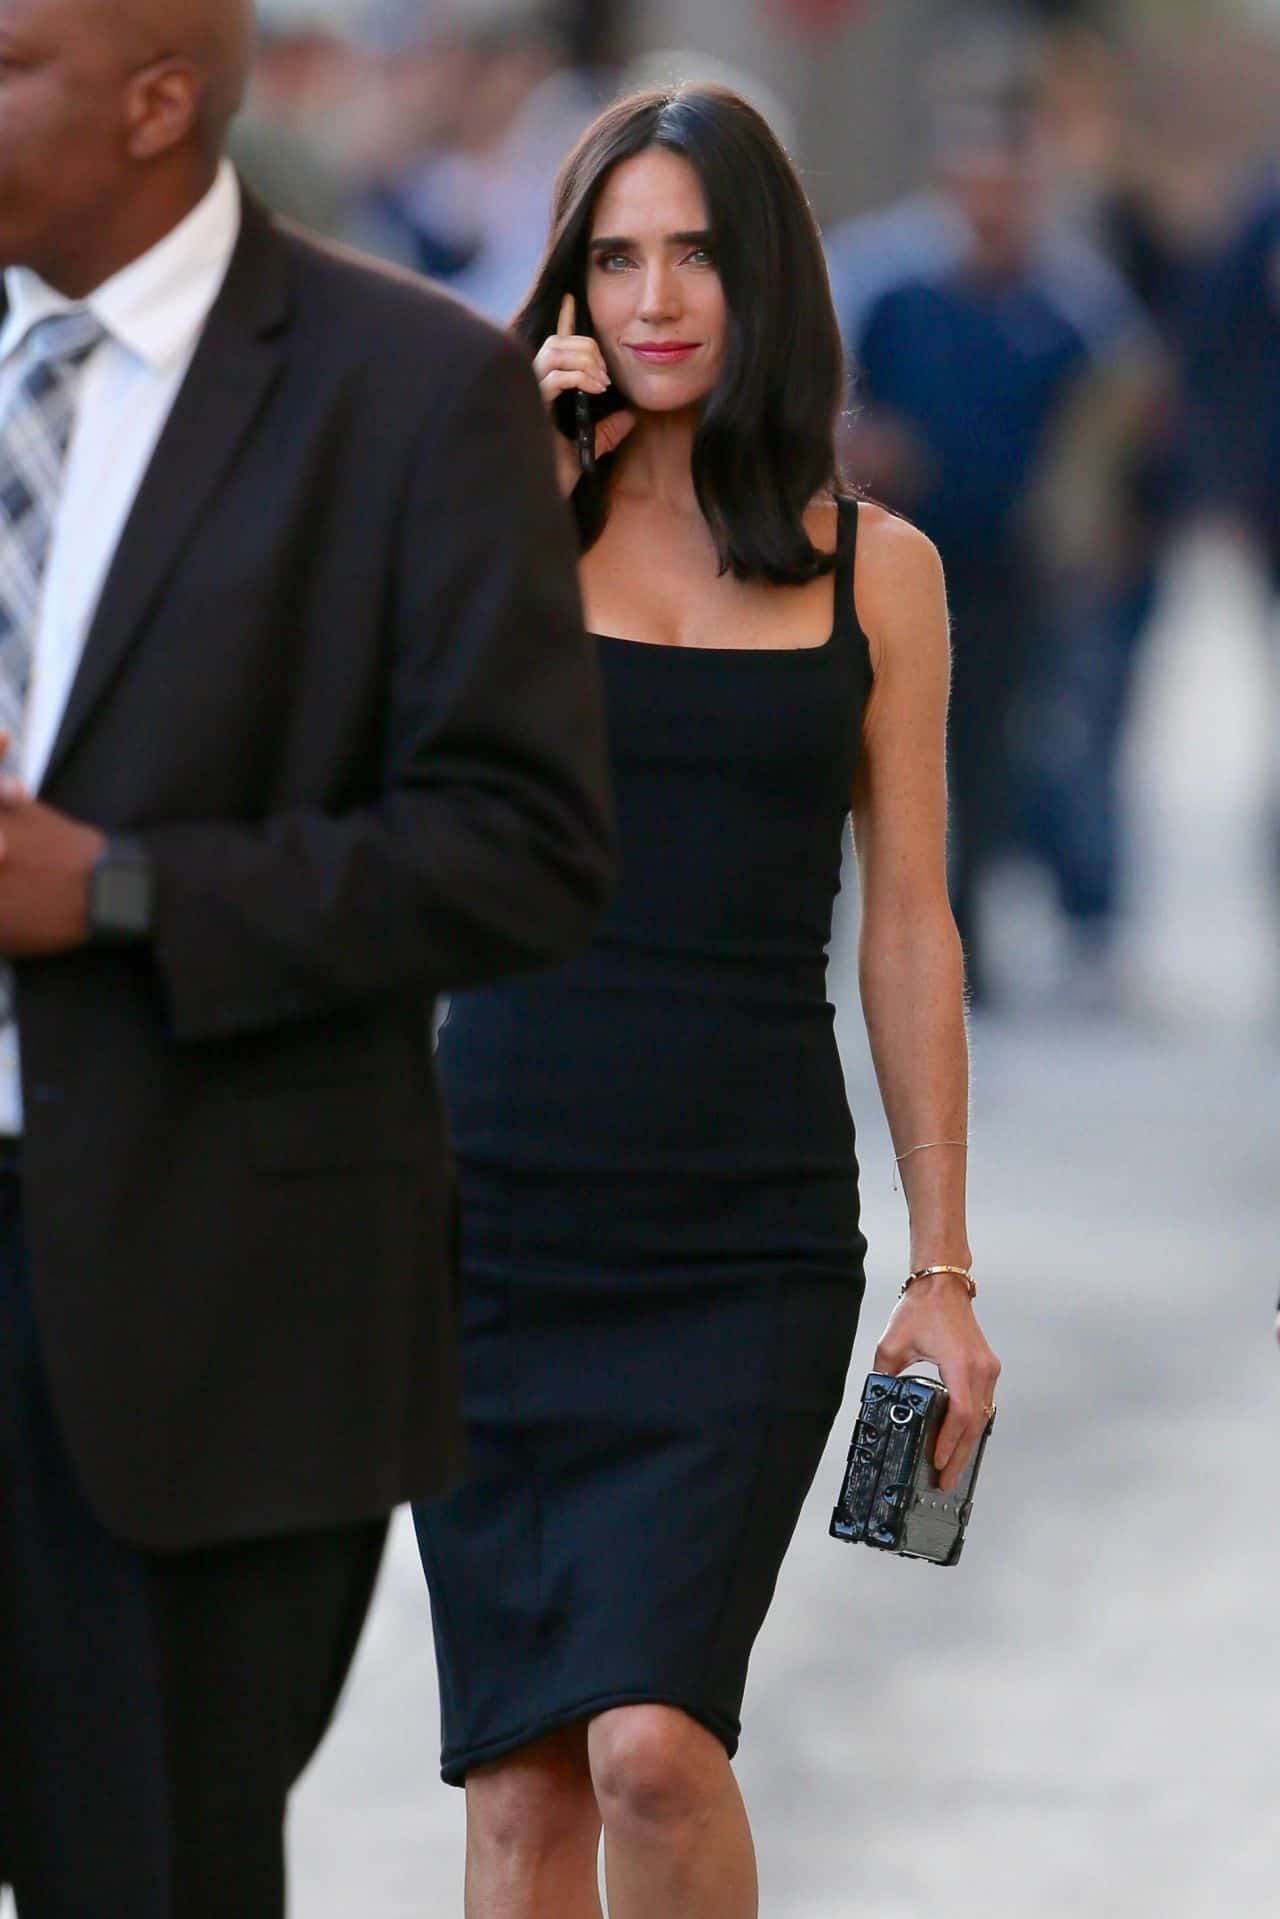 Jennifer Connelly Shows Her Incredible Figure and Ageless Beauty in LBD